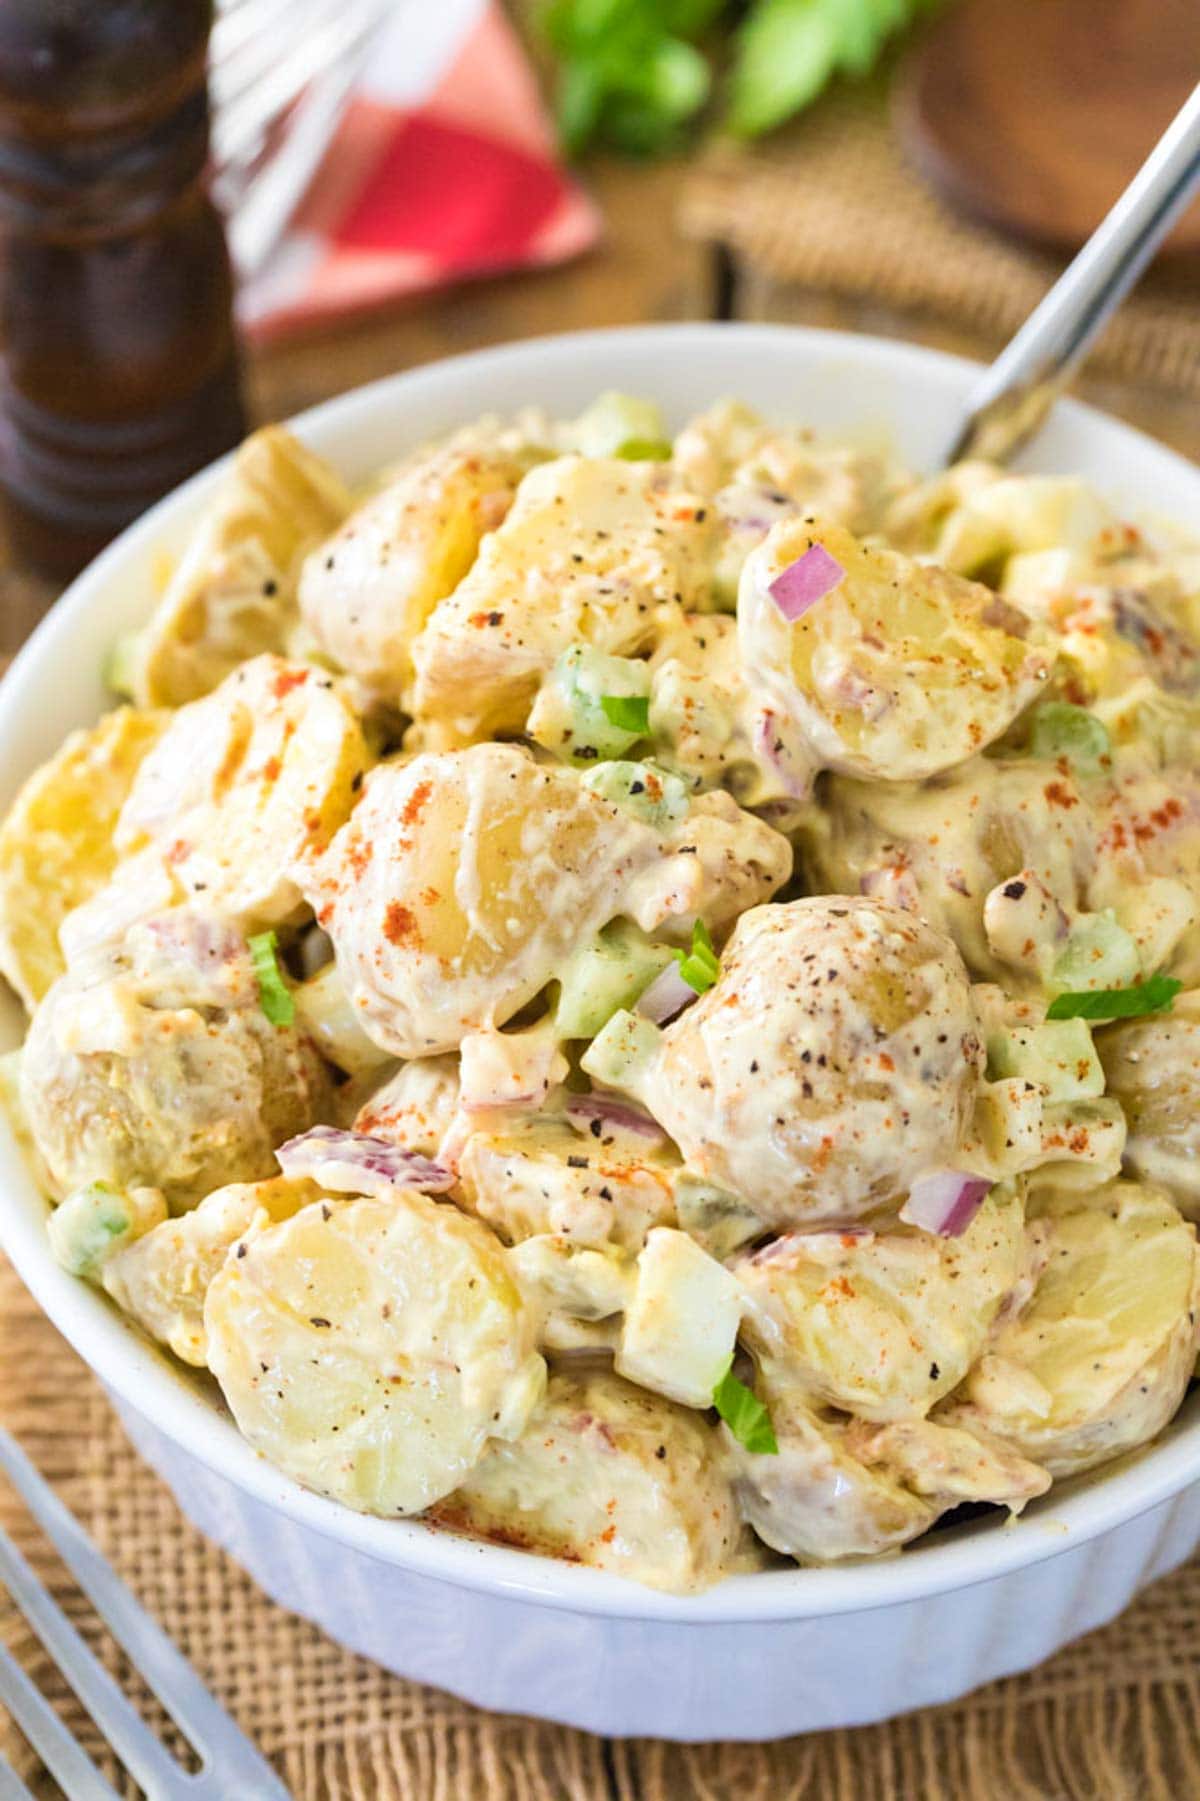 Close-up view of a salad made with potatoes, celery, onions, and more.